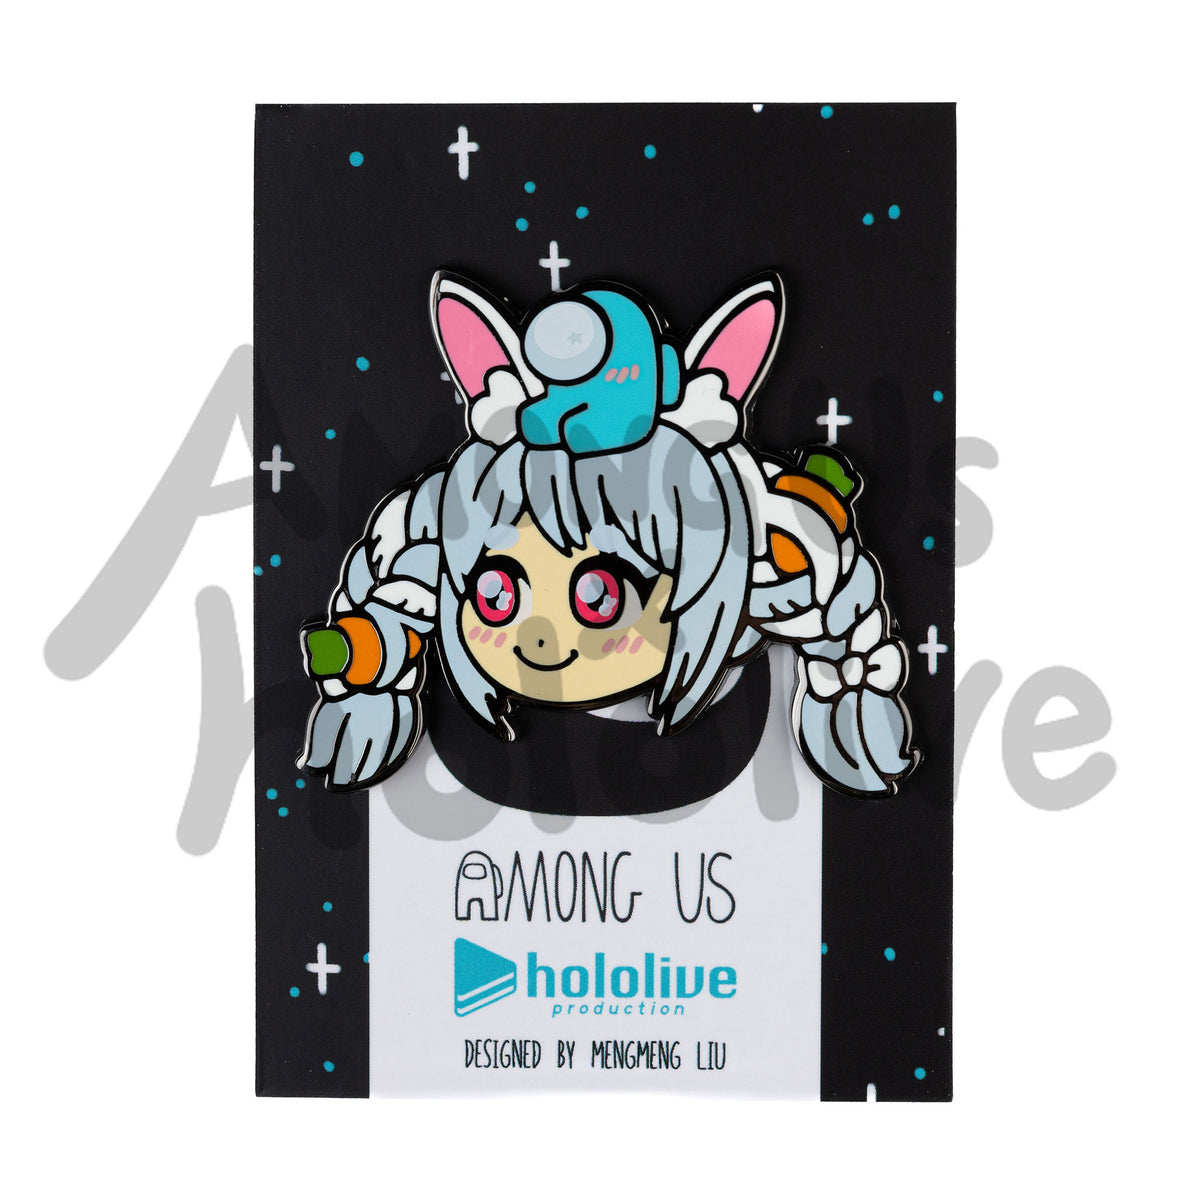 Hololive x Among Us black backing card covered with blue and white stars. There&#39;s a white Crewmate in the middle of the card covered up by an enamel pin of Pekora’s face, a tiny cyan Crewmate sitting atop her head. Backing Card text reads &quot;Among Us Hololive Production Designed by Mengmeng Liu.&quot;